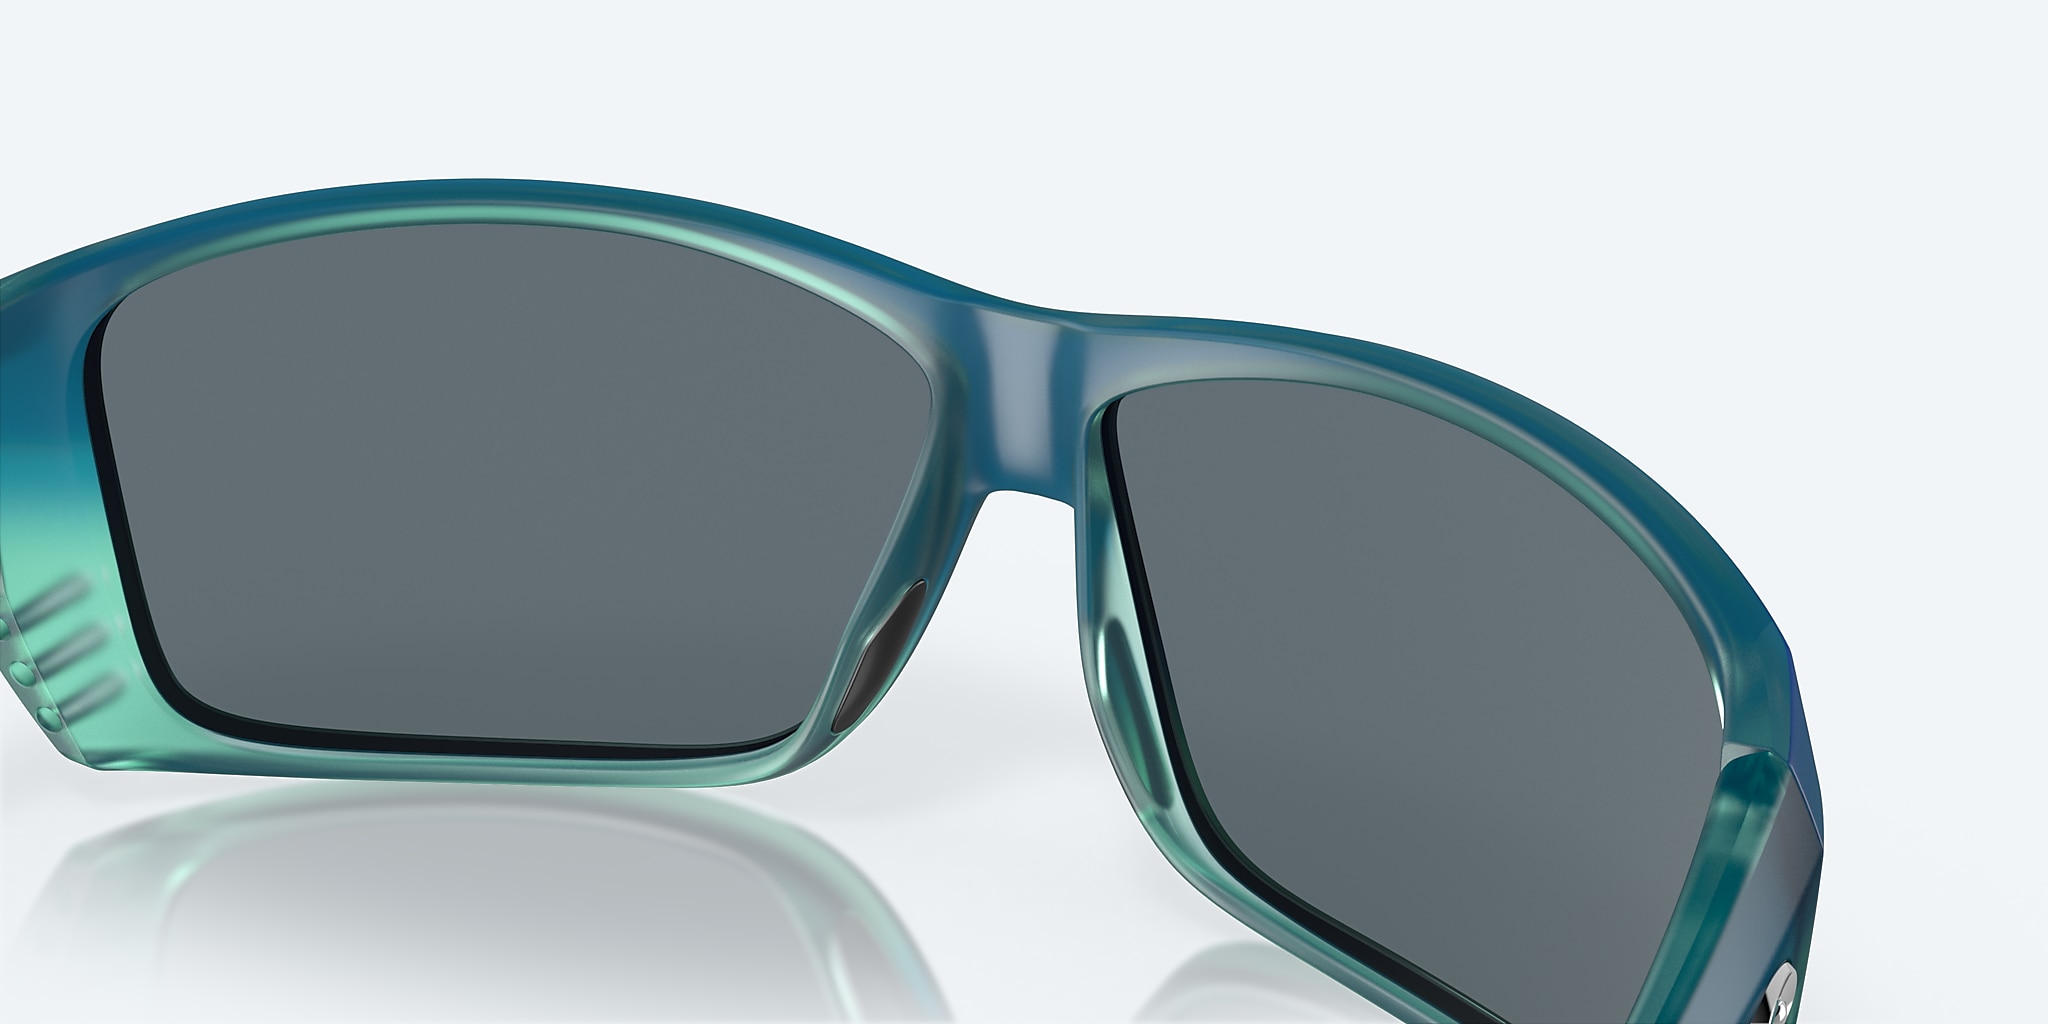 Atlantic Chill Cat Eye Sunglasses - Polarized Blue Mirror Lens With  Oversized Mother Of Pearl Print Frame